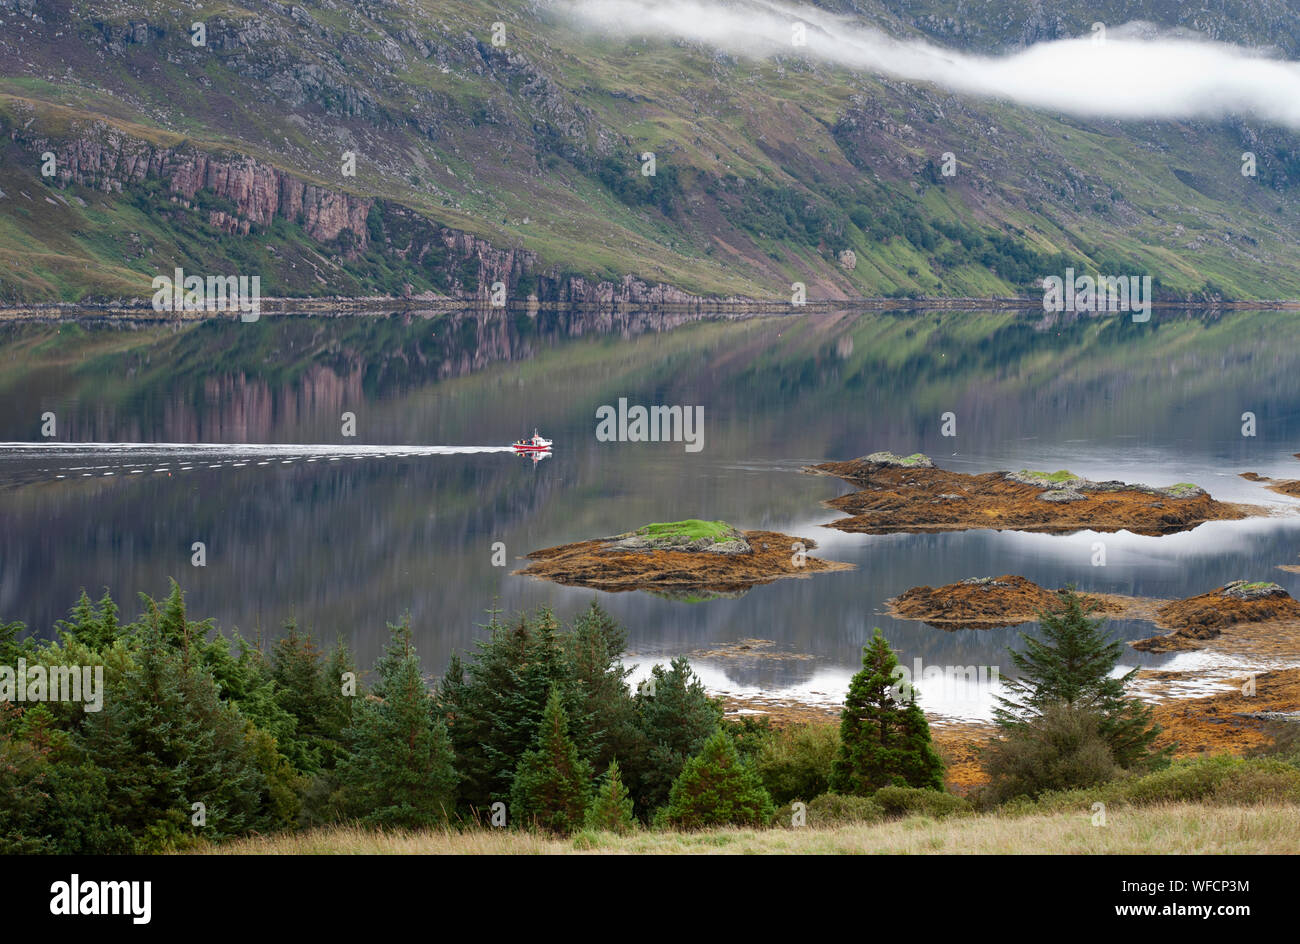 Loch with islands and red fishing boat moving across still water, Scottish Highlands, Scotland. Stock Photo